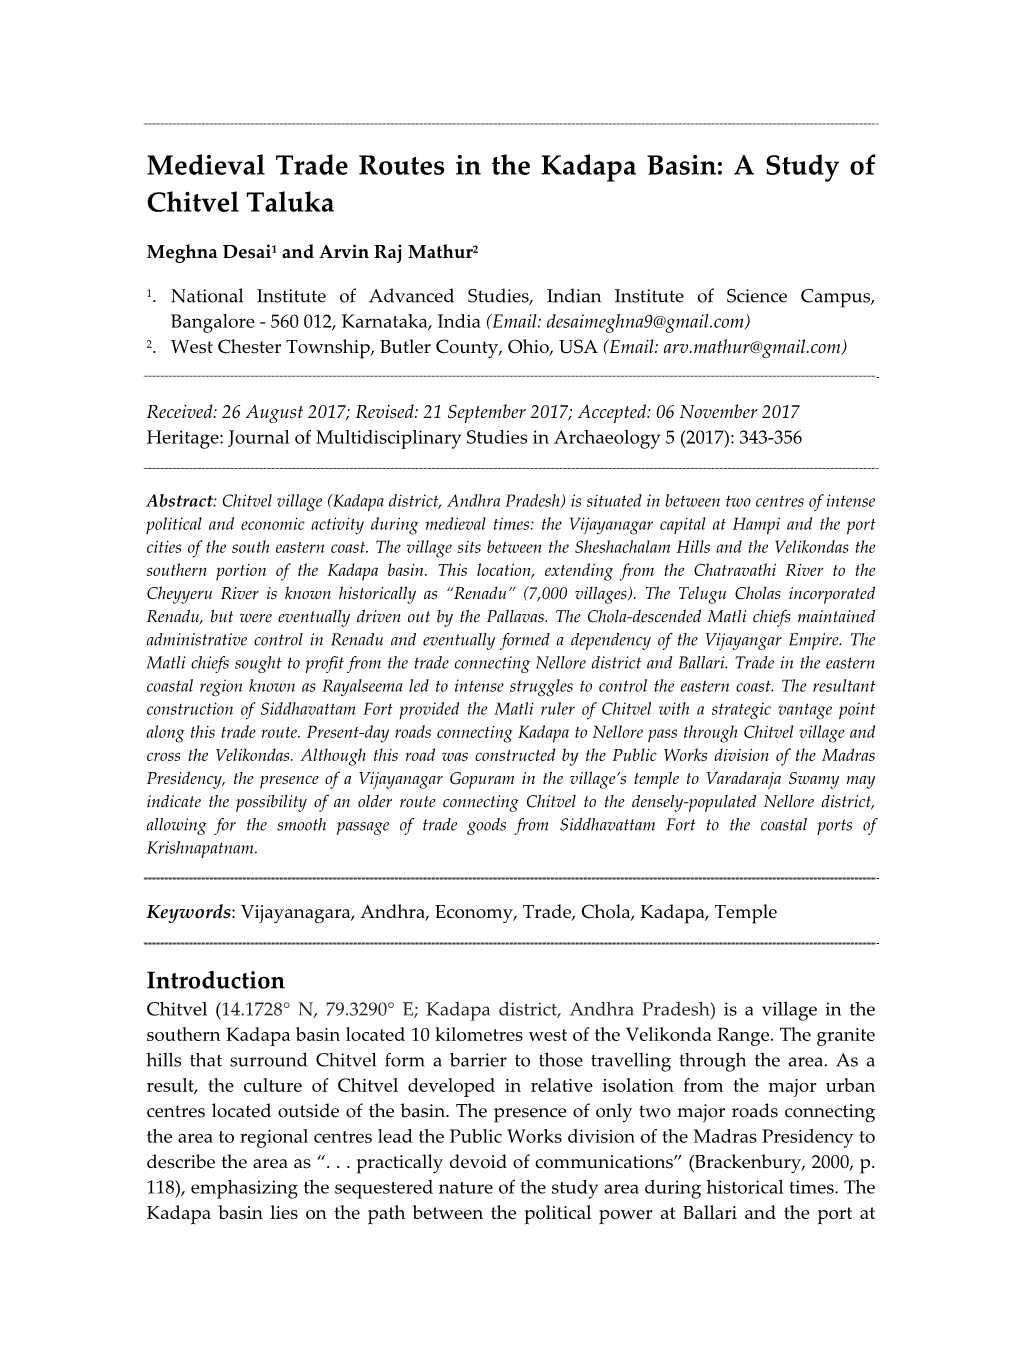 Medieval Trade Routes in the Kadapa Basin: a Study of Chitvel Taluka